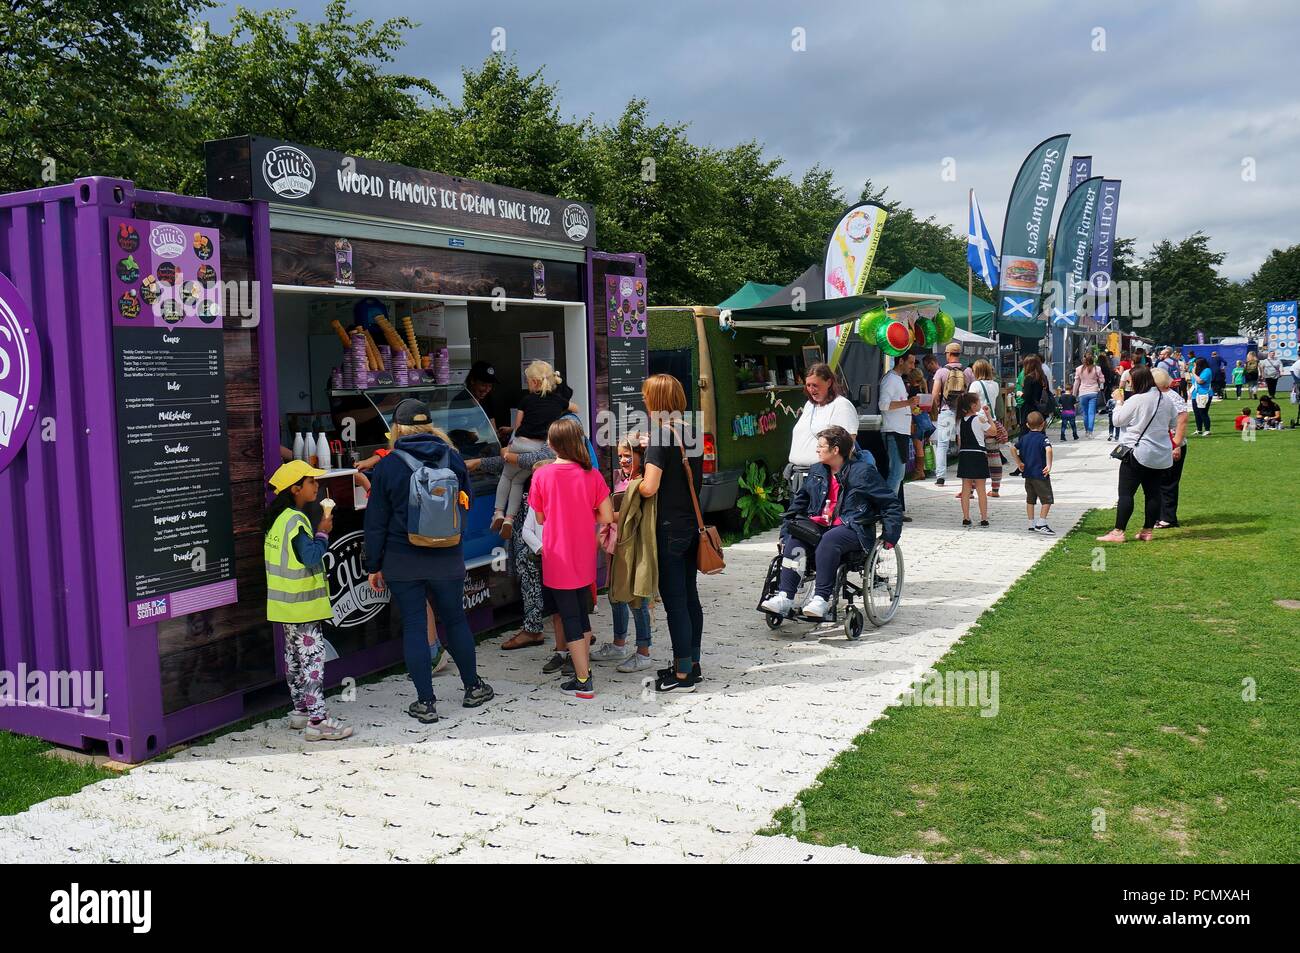 Glasgow, UK, 3rd July 2018,  Despite mixed weather people of Glasgow and tousands of tourists enjoy many events organised around in and around Glasgow ( Green park pictured) associated with the first European Championships 2018. Credit: Pawel Pietraszewski / Alamy Live News Stock Photo